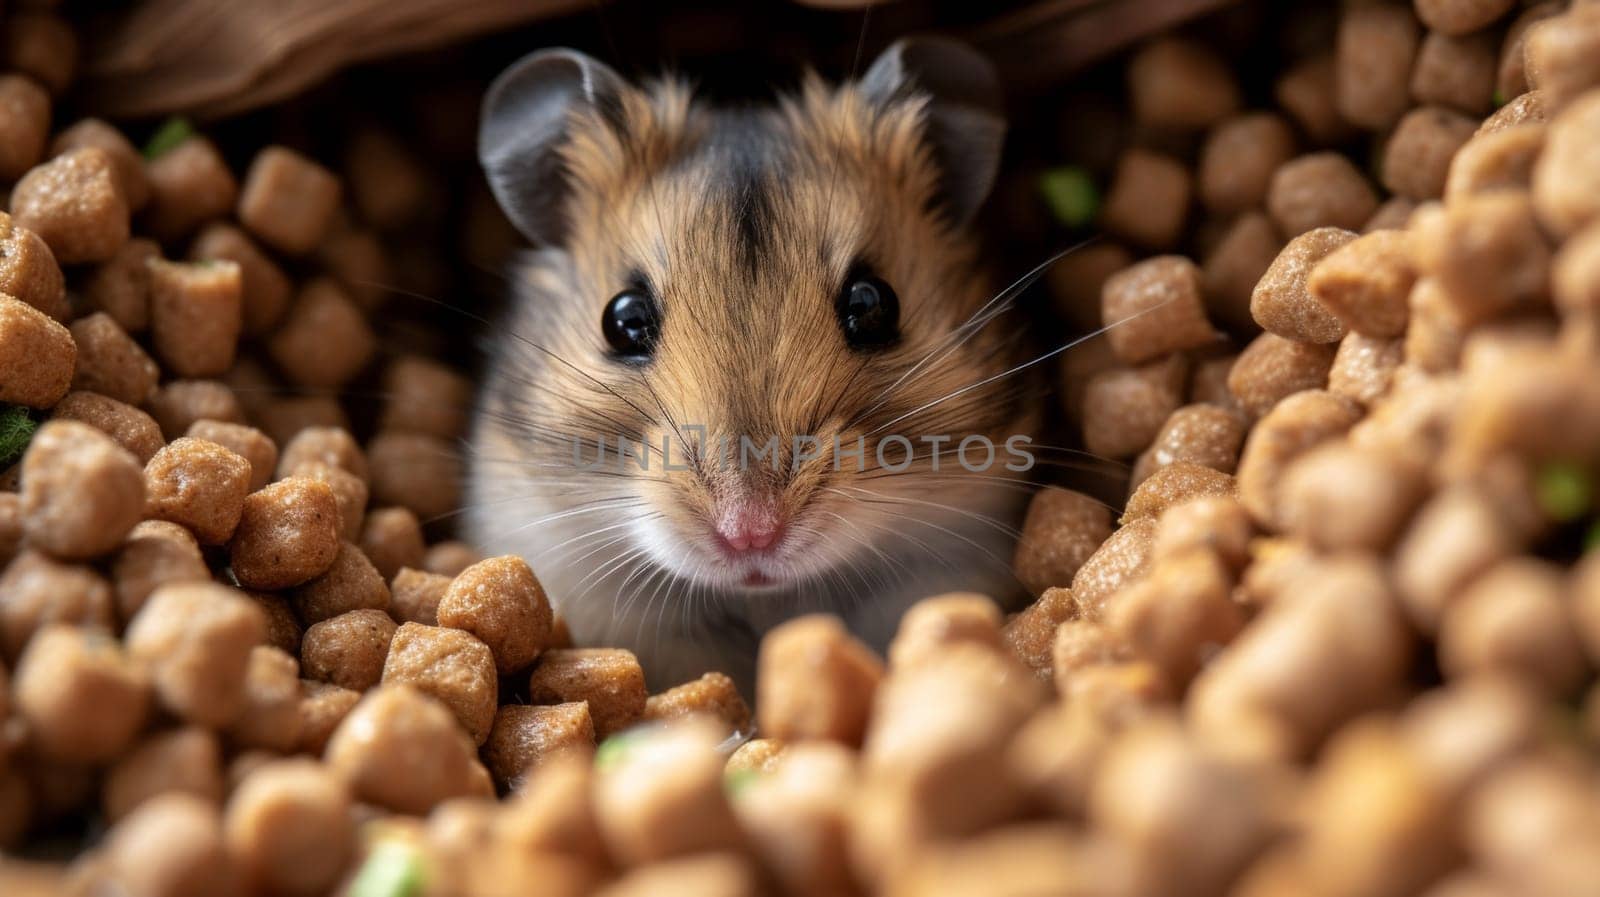 A hamster peeking out from a pile of food pellets, AI by starush